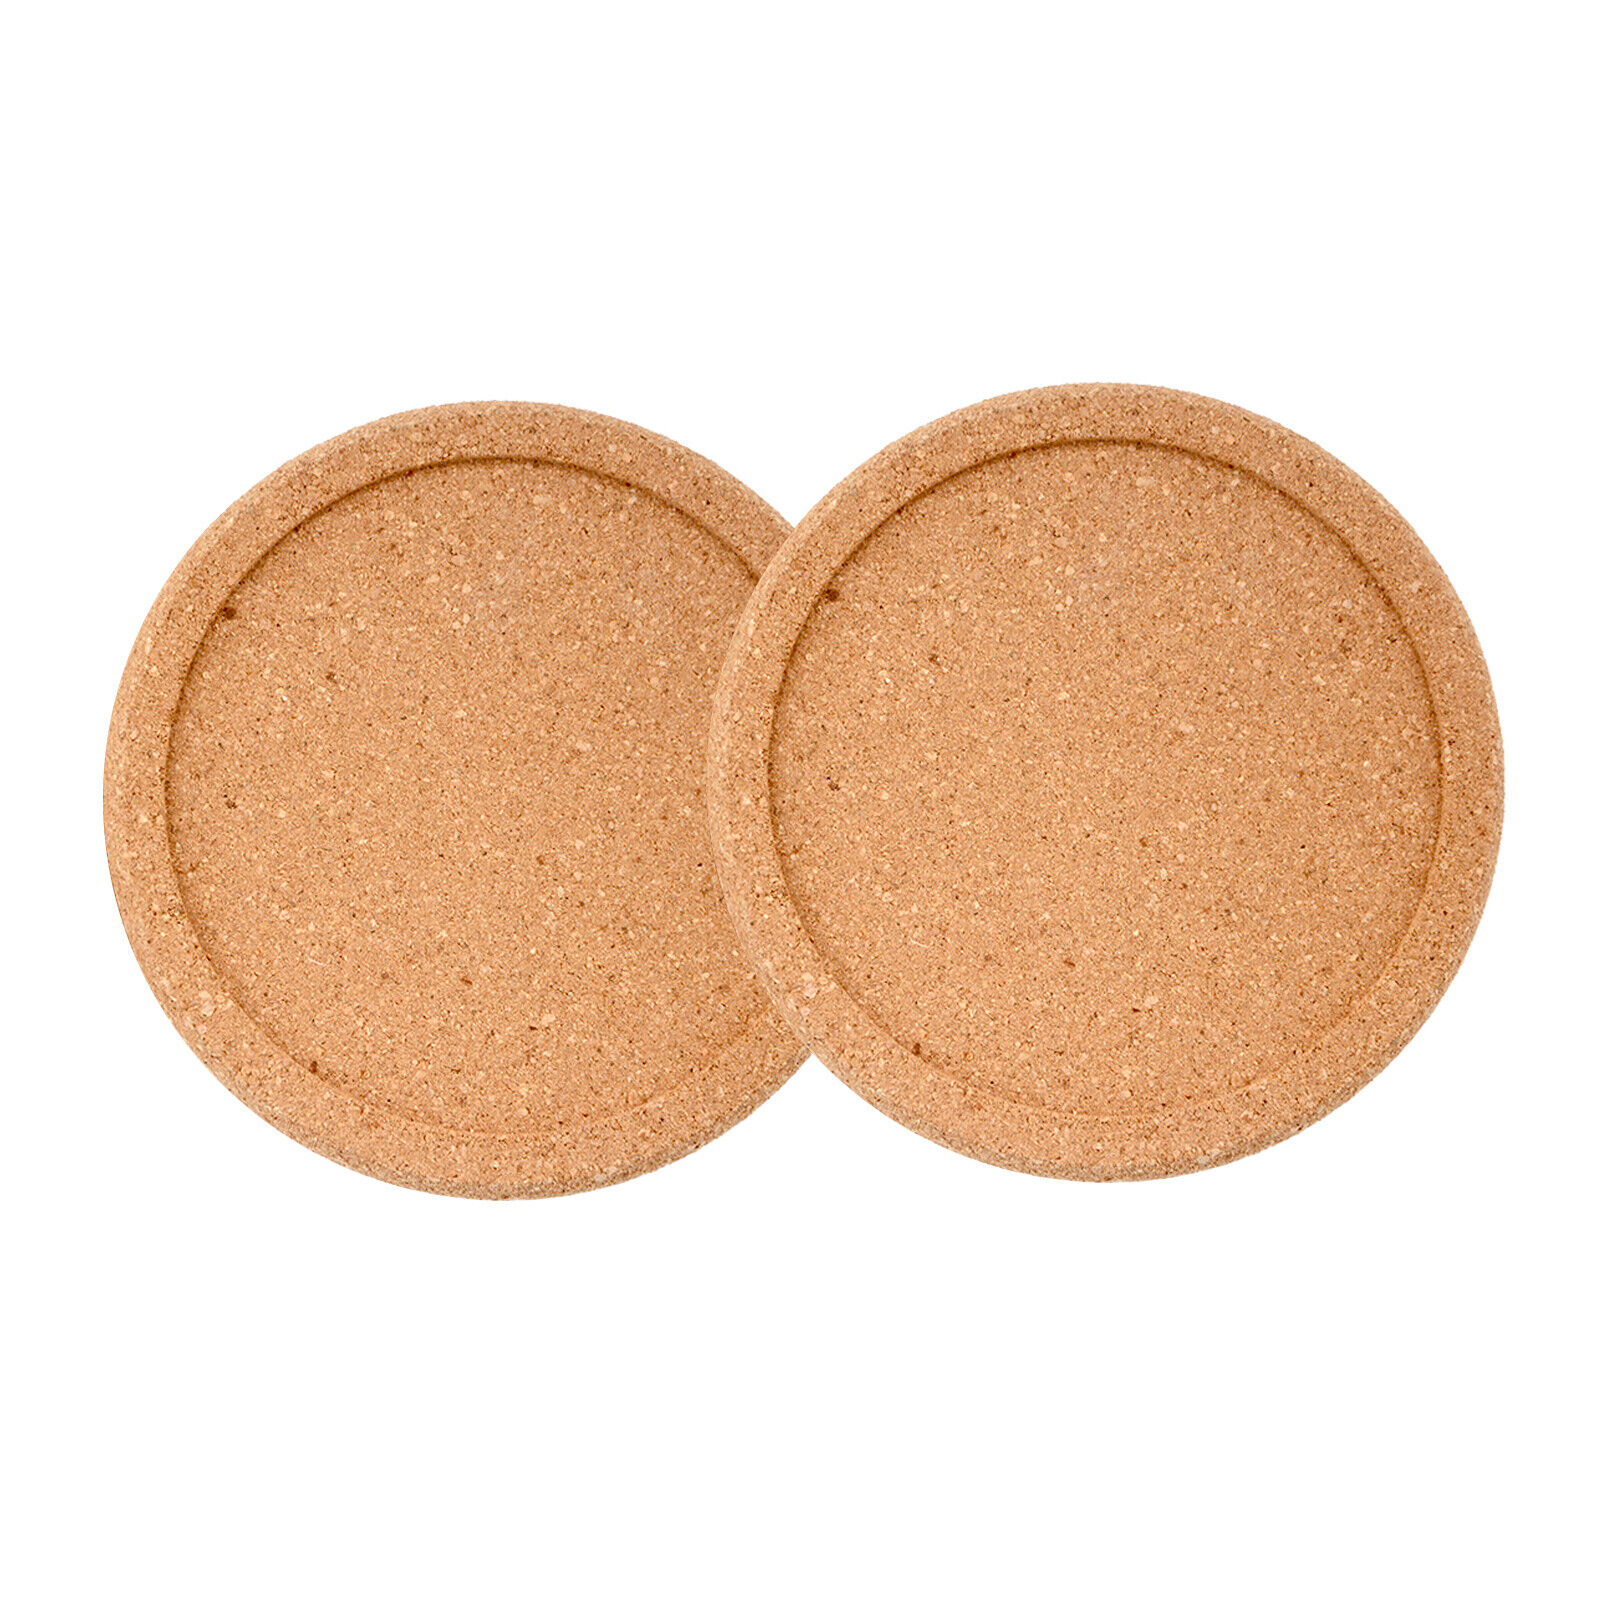 Natural Cork Coasters for Drinks Absorbent Heat&Water Resistant Durable Saucers